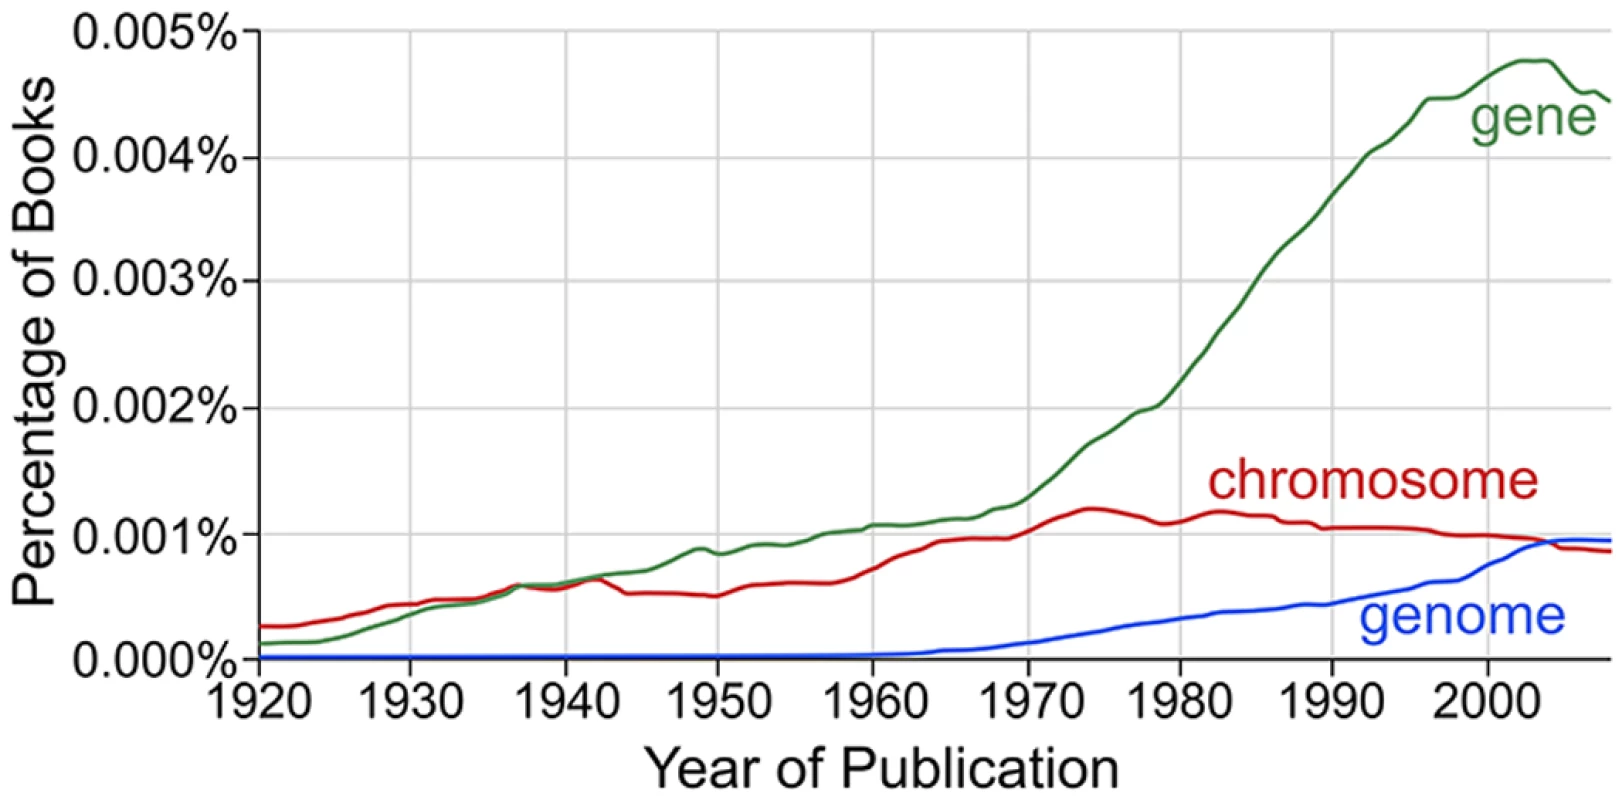 The change in usage of the term “genome” compared to related terms.